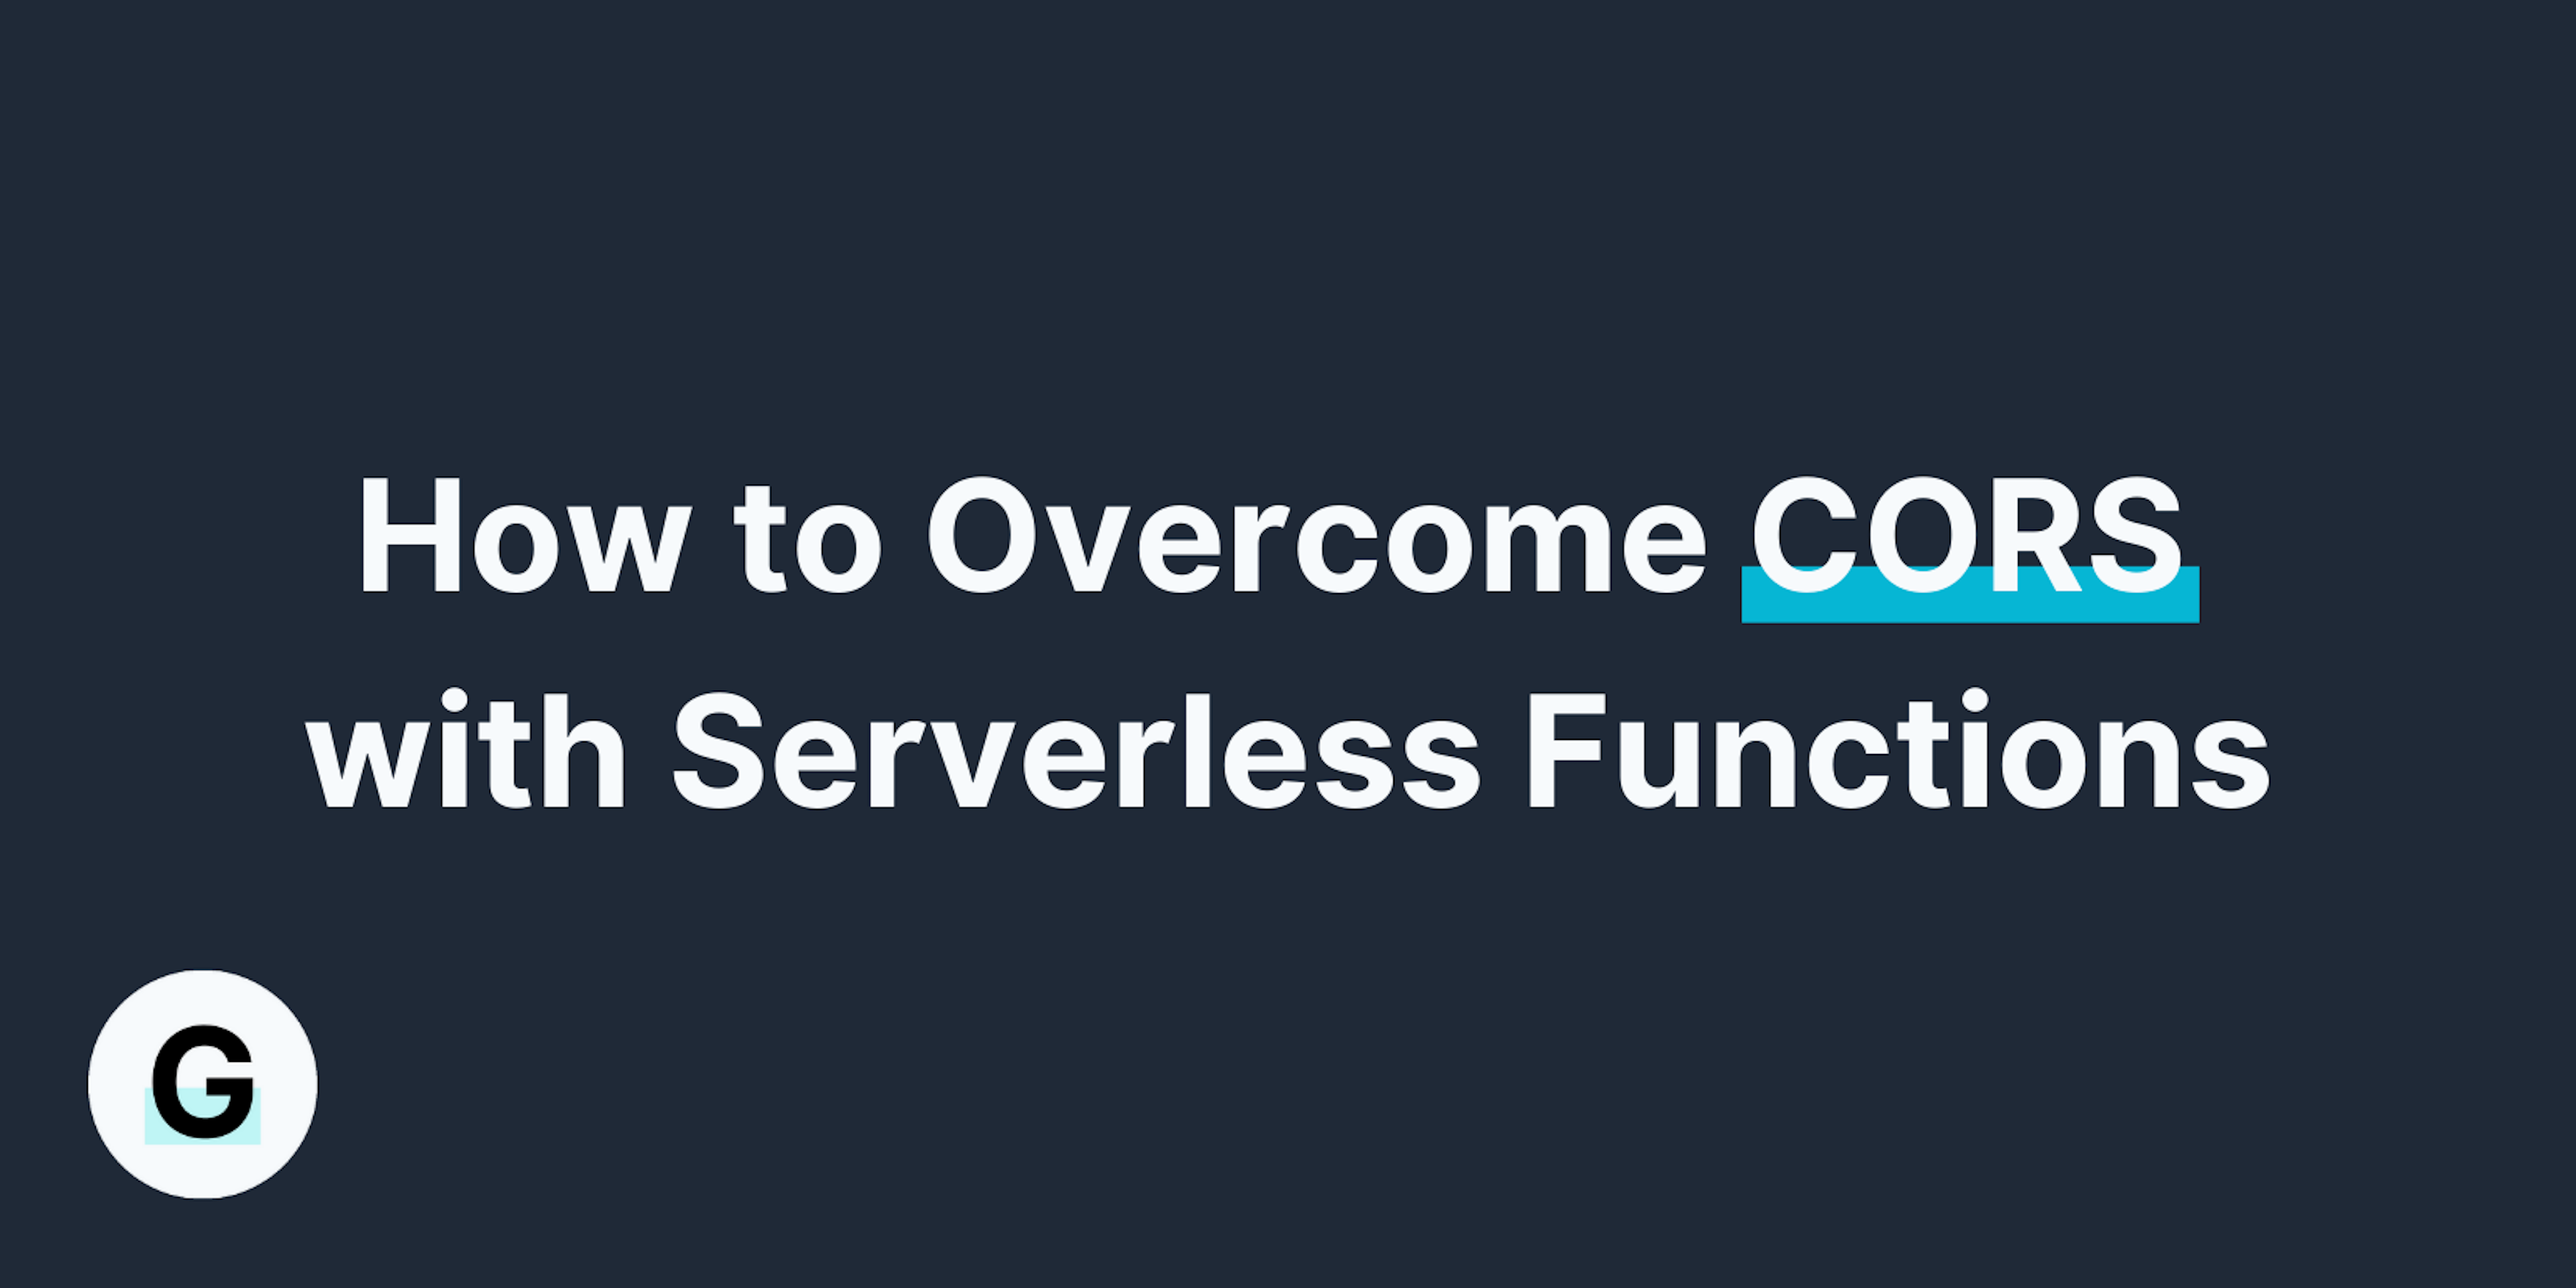 How to Overcome CORS with Serverless Functions